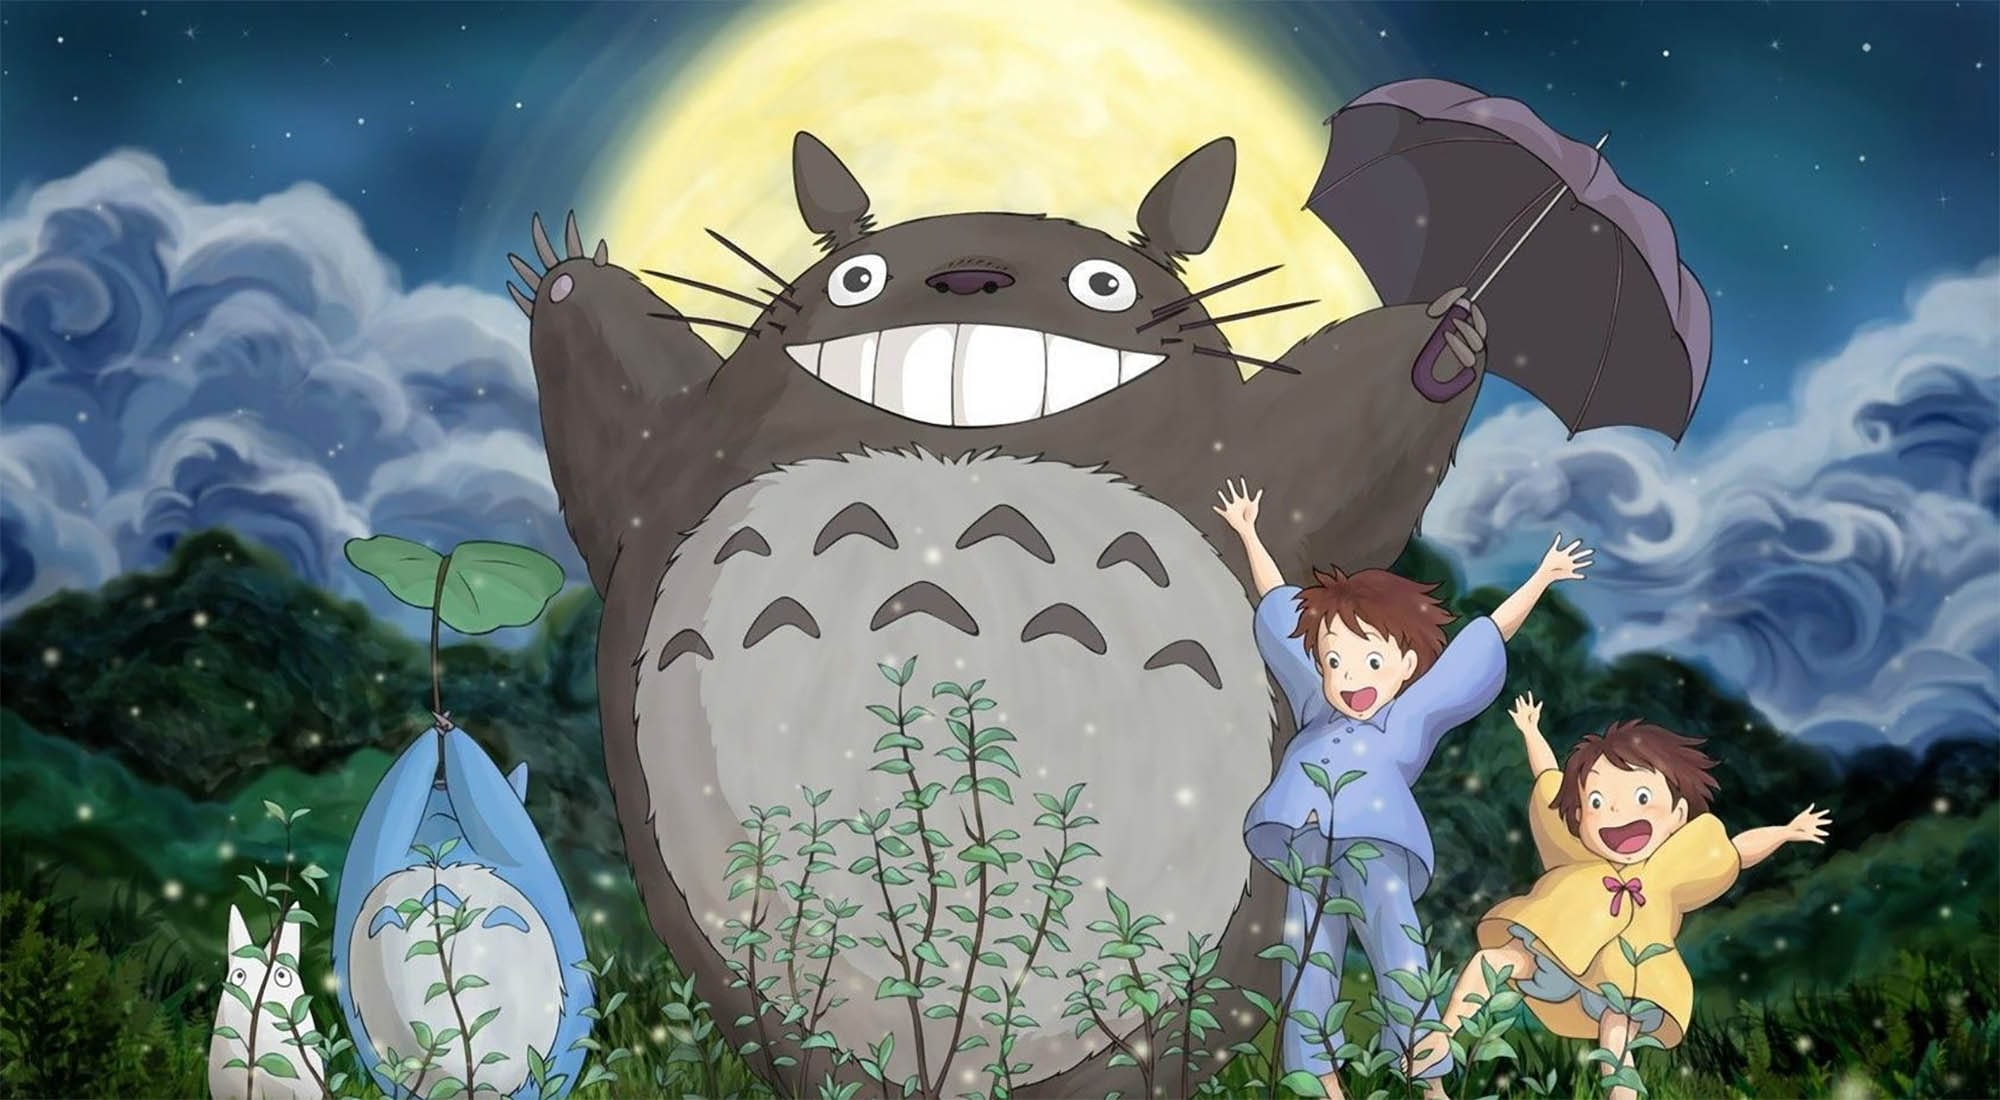 It’s been several weeks since the world of anime lost one of its great visionaries – Studio Ghibli co-founder Isao Takahata, who passed aged 82. To celebrate the work of co-founder and director Hayao Miyazaki, Japan’s Aichi Prefecture is set to open a Studio Ghibli theme park.